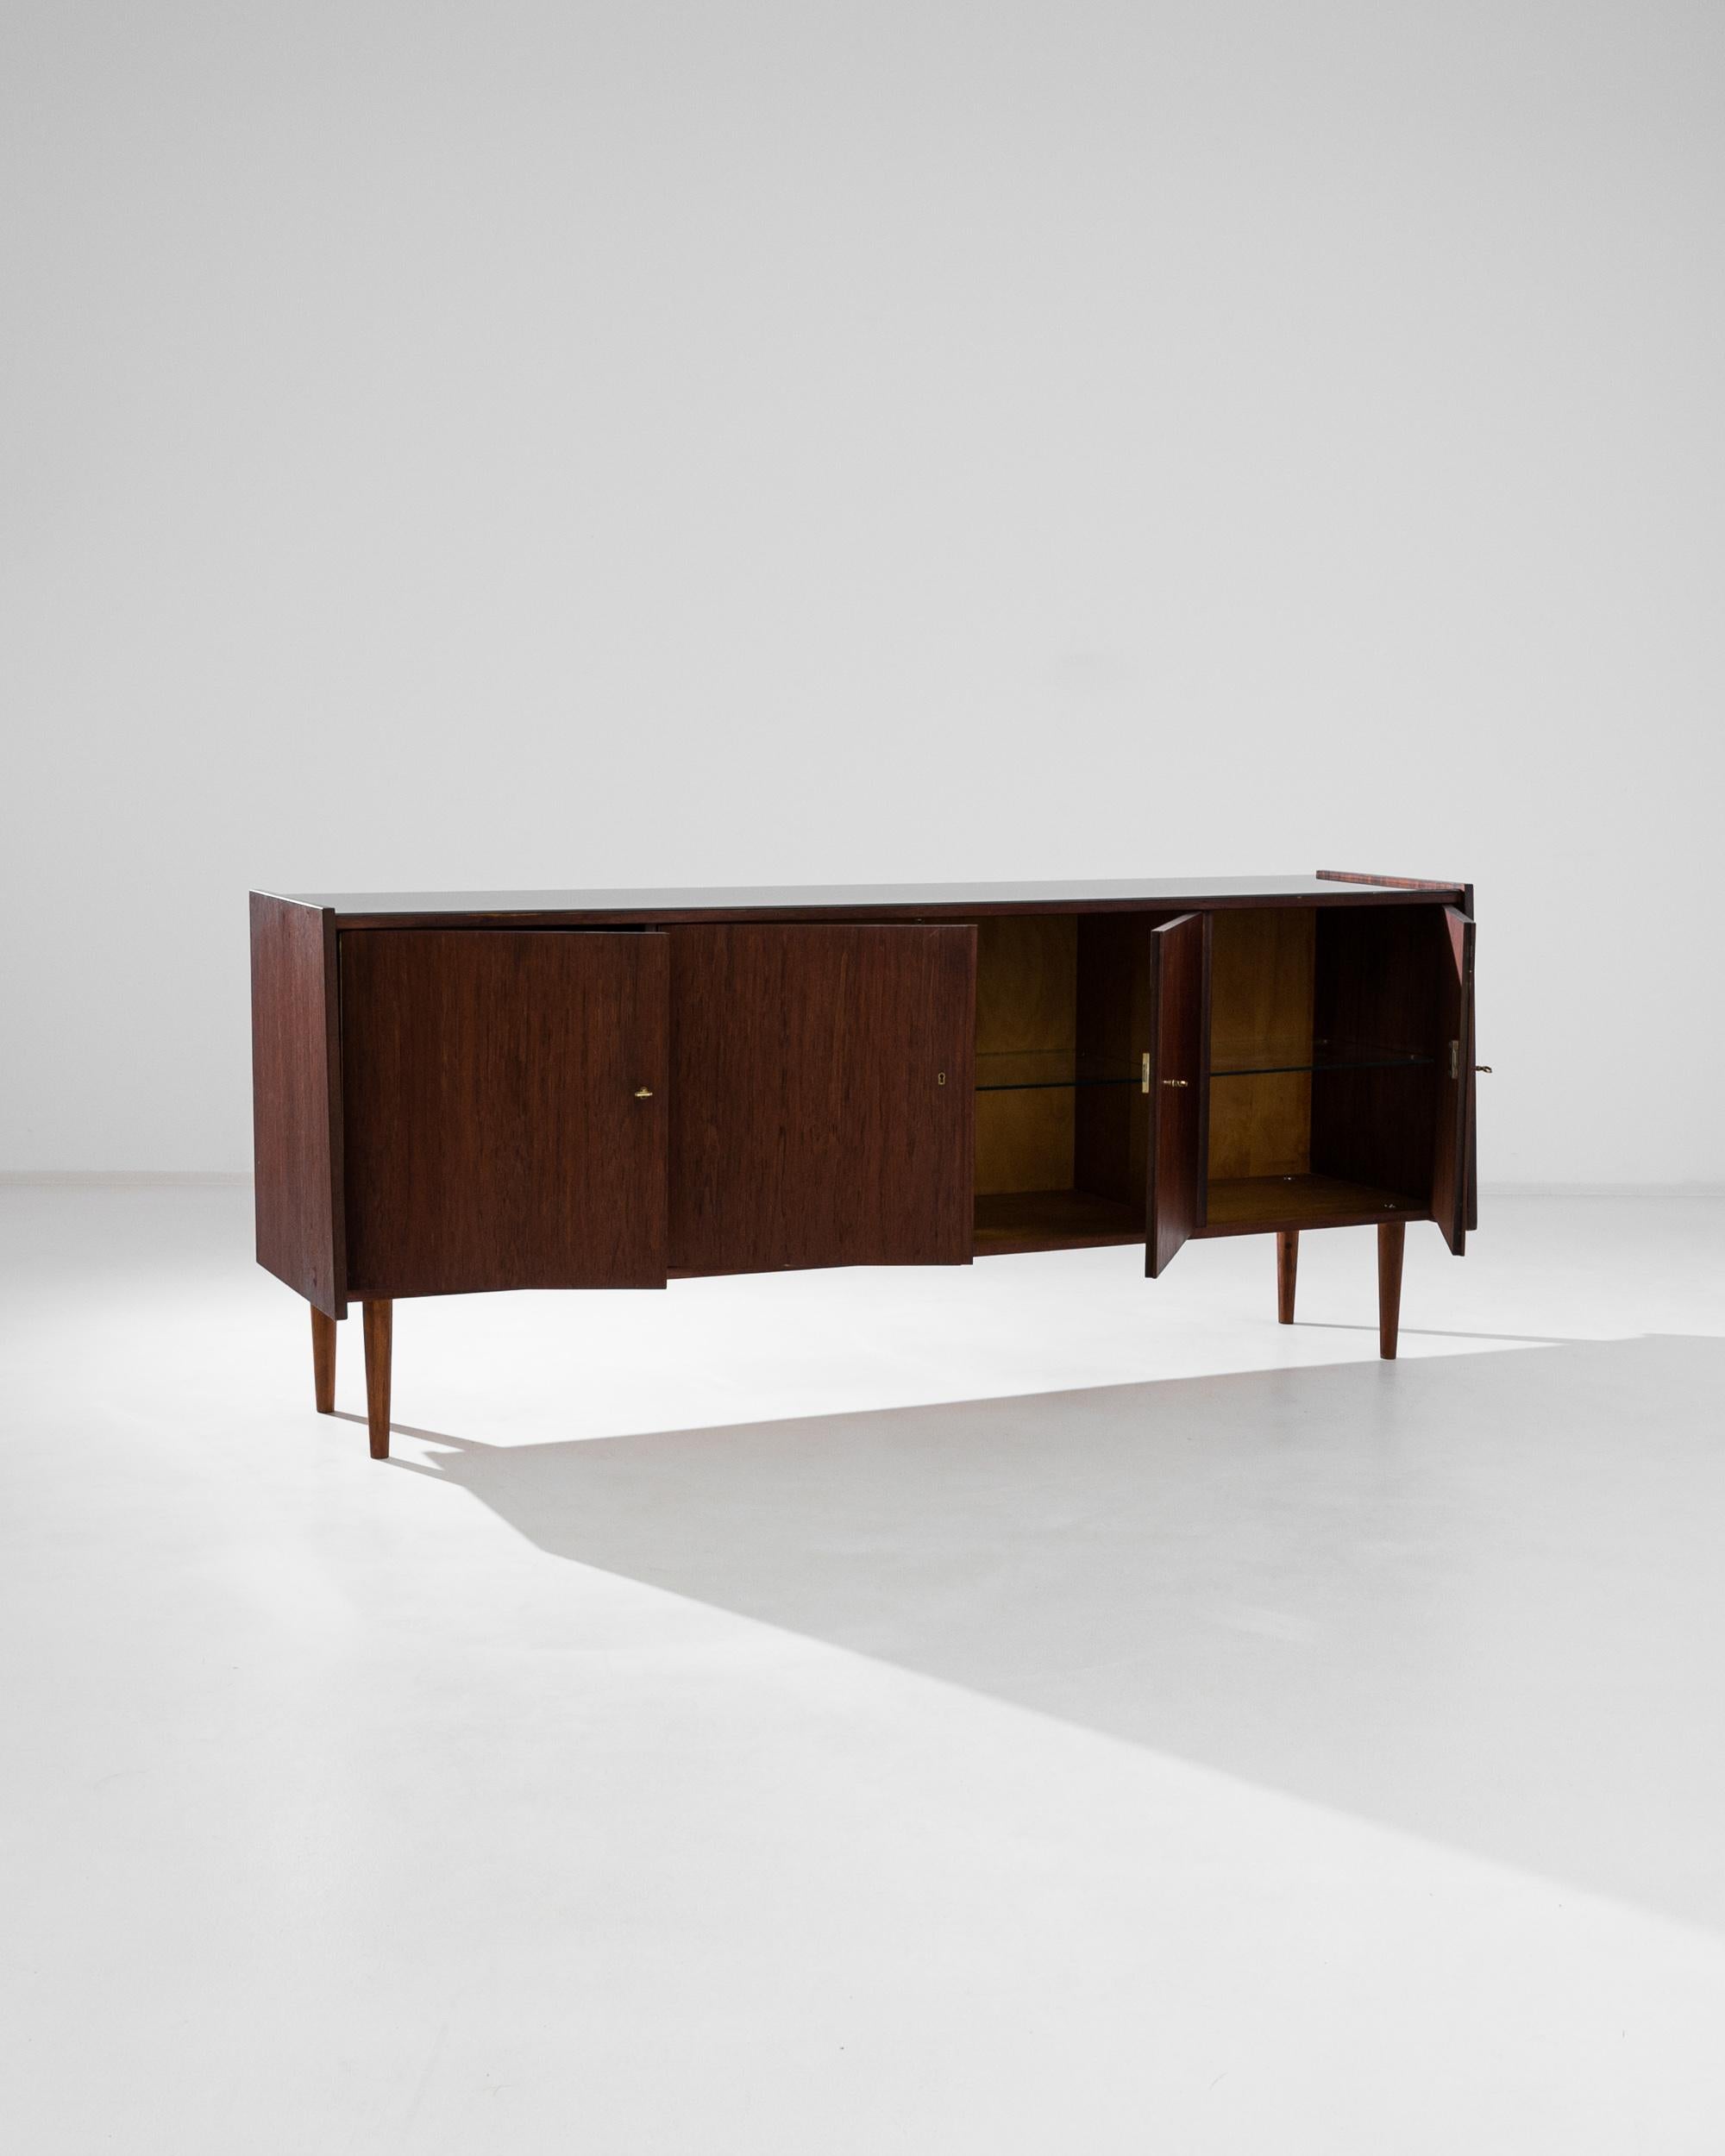 A wooden sideboard with glass top from Denmark, produced circa 1960. A cool, classic Mid-Century Modern sideboard constructed of dark teak laid in planes that create chic angles. This handsome piece features four locking cabinets with a glass shelf